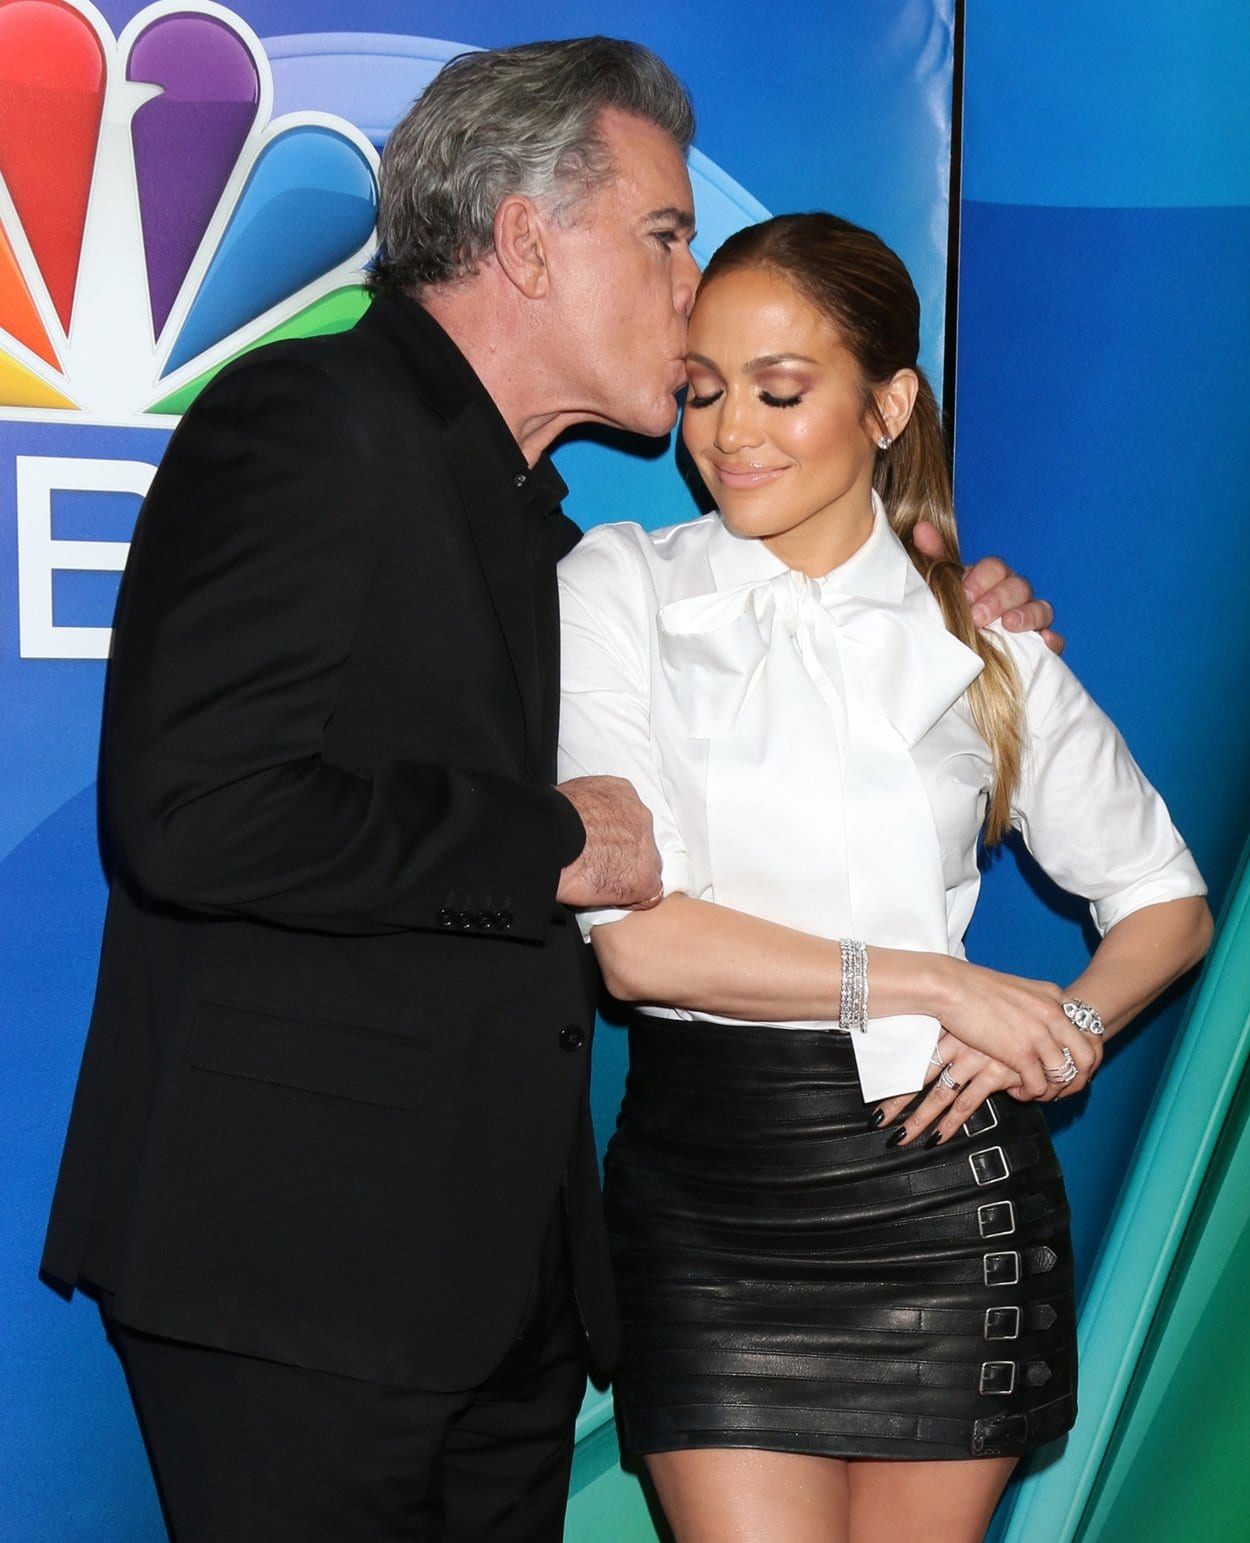 Jennifer Lopez gets a kiss on the head from her 'Shades of Blue' co-star Ray Liotta